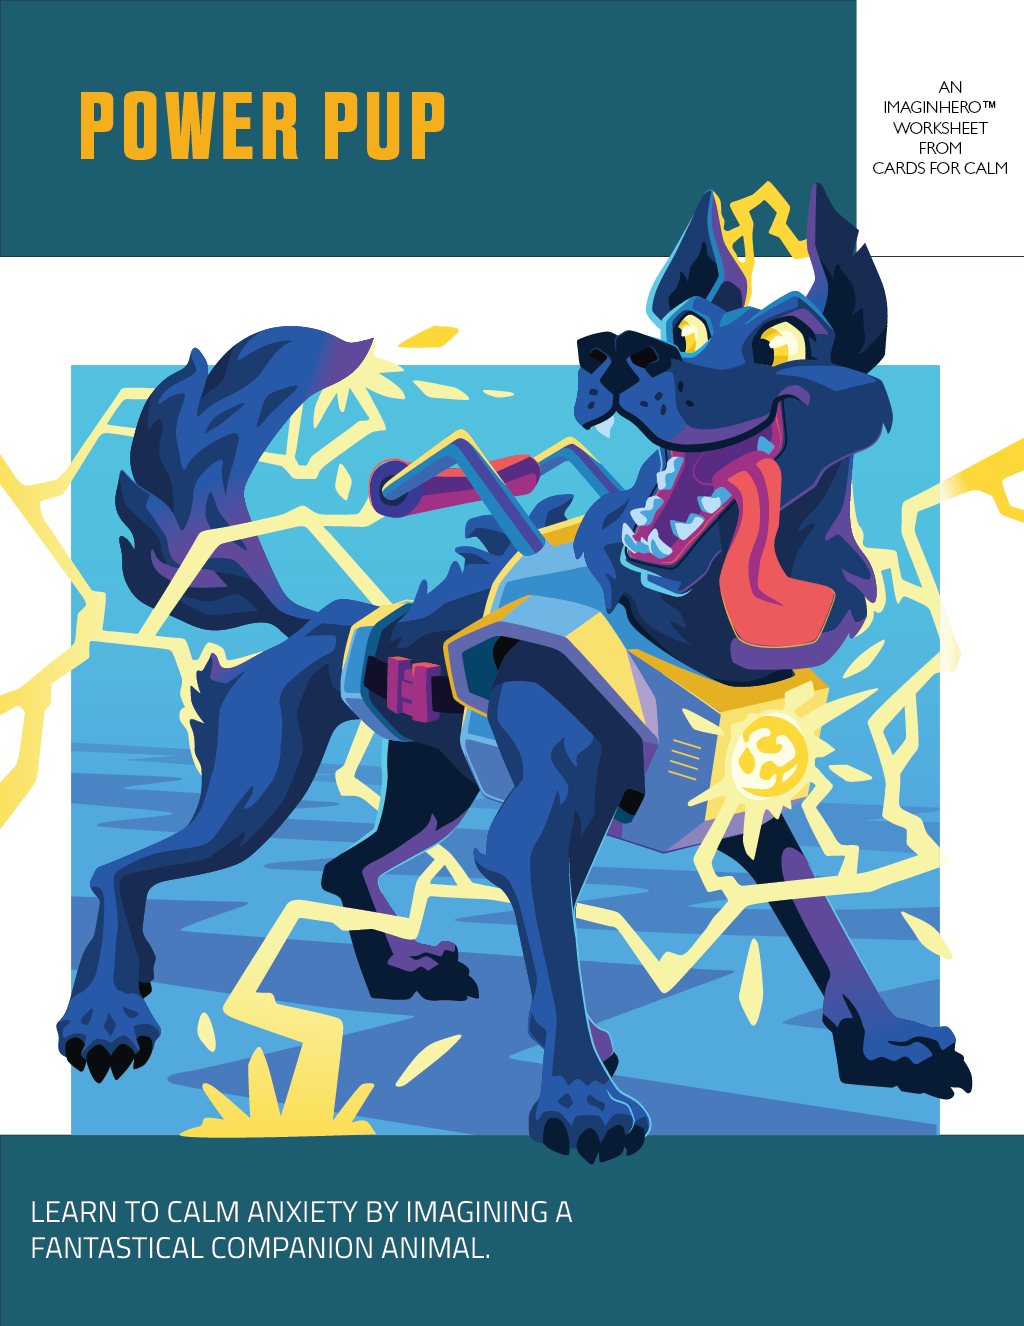 Imaginhero Worksheets: Power Pup. Learn to calm anxiety by imagining a companion animal.